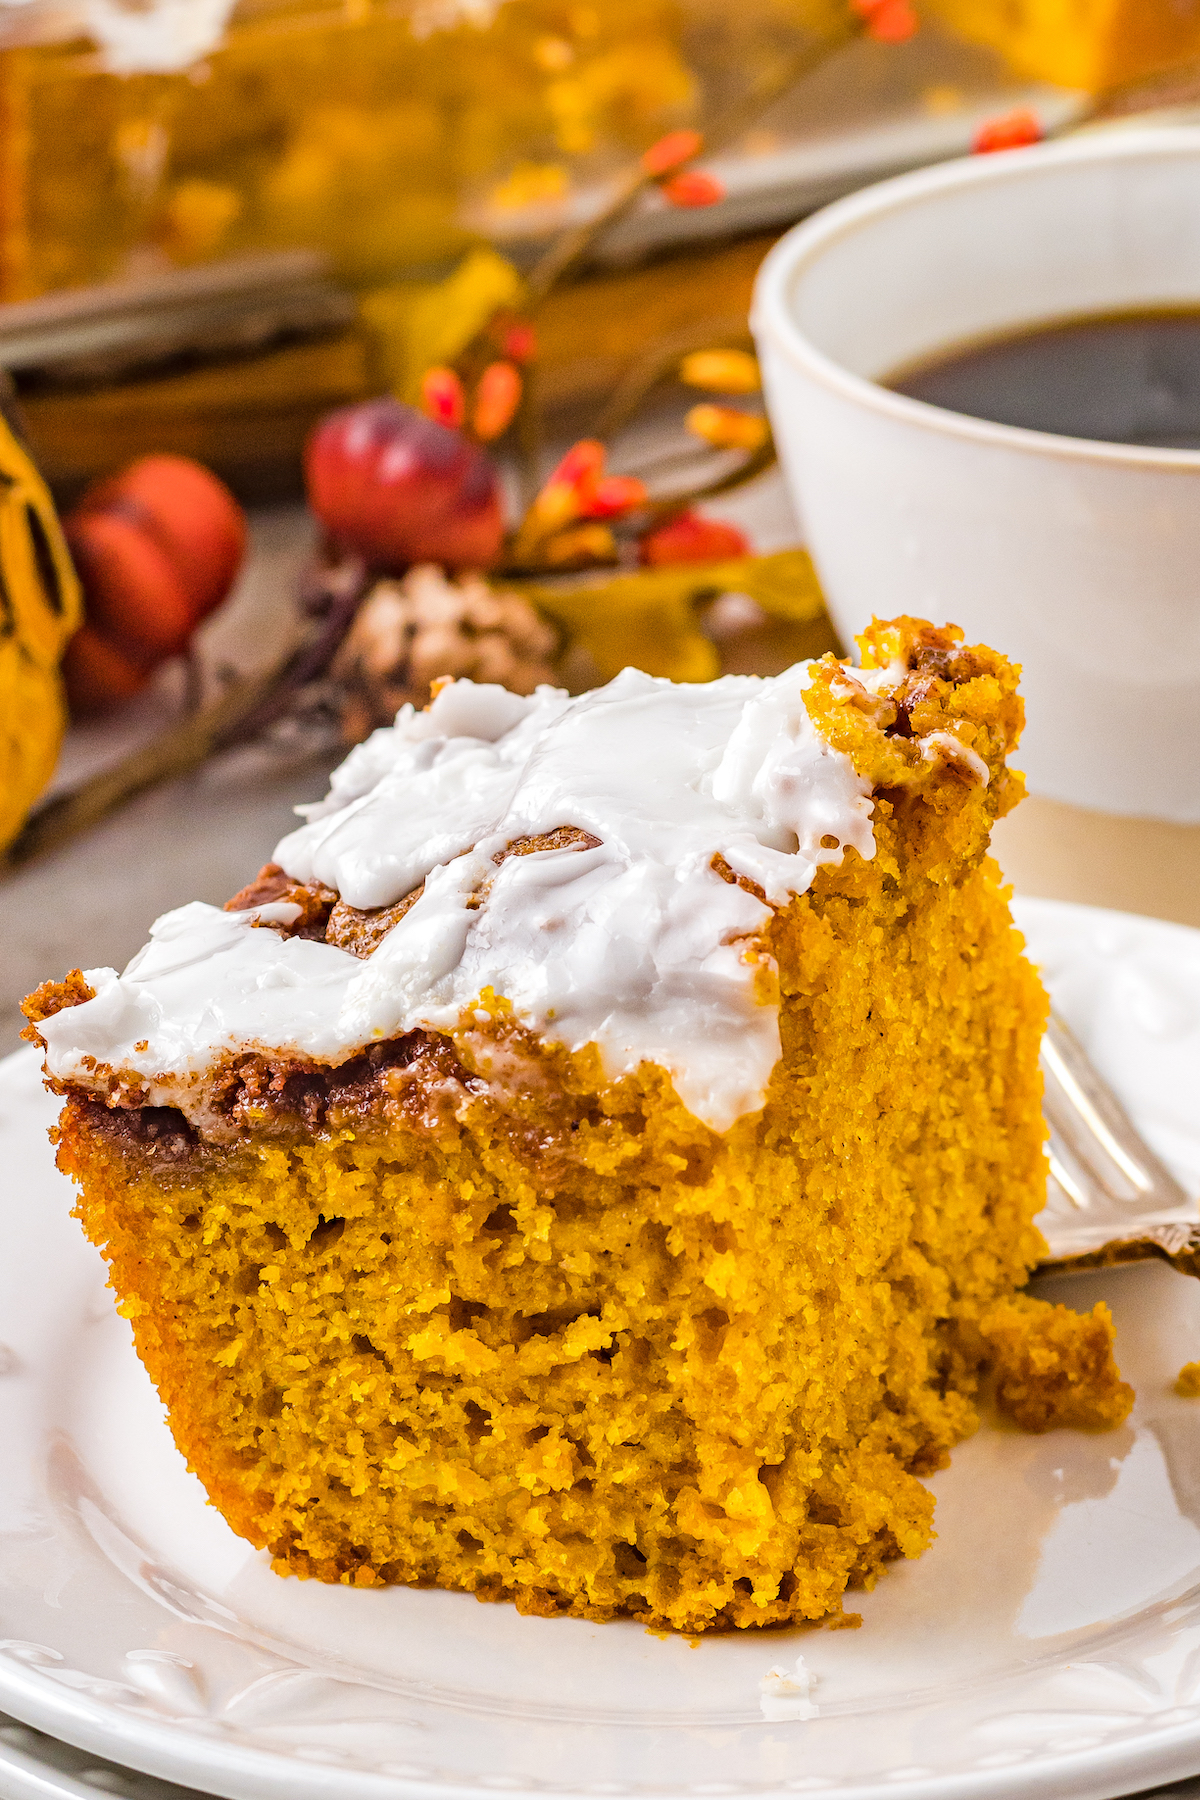 Pumpkin cake with a sweet glaze, next to a cup of coffee.